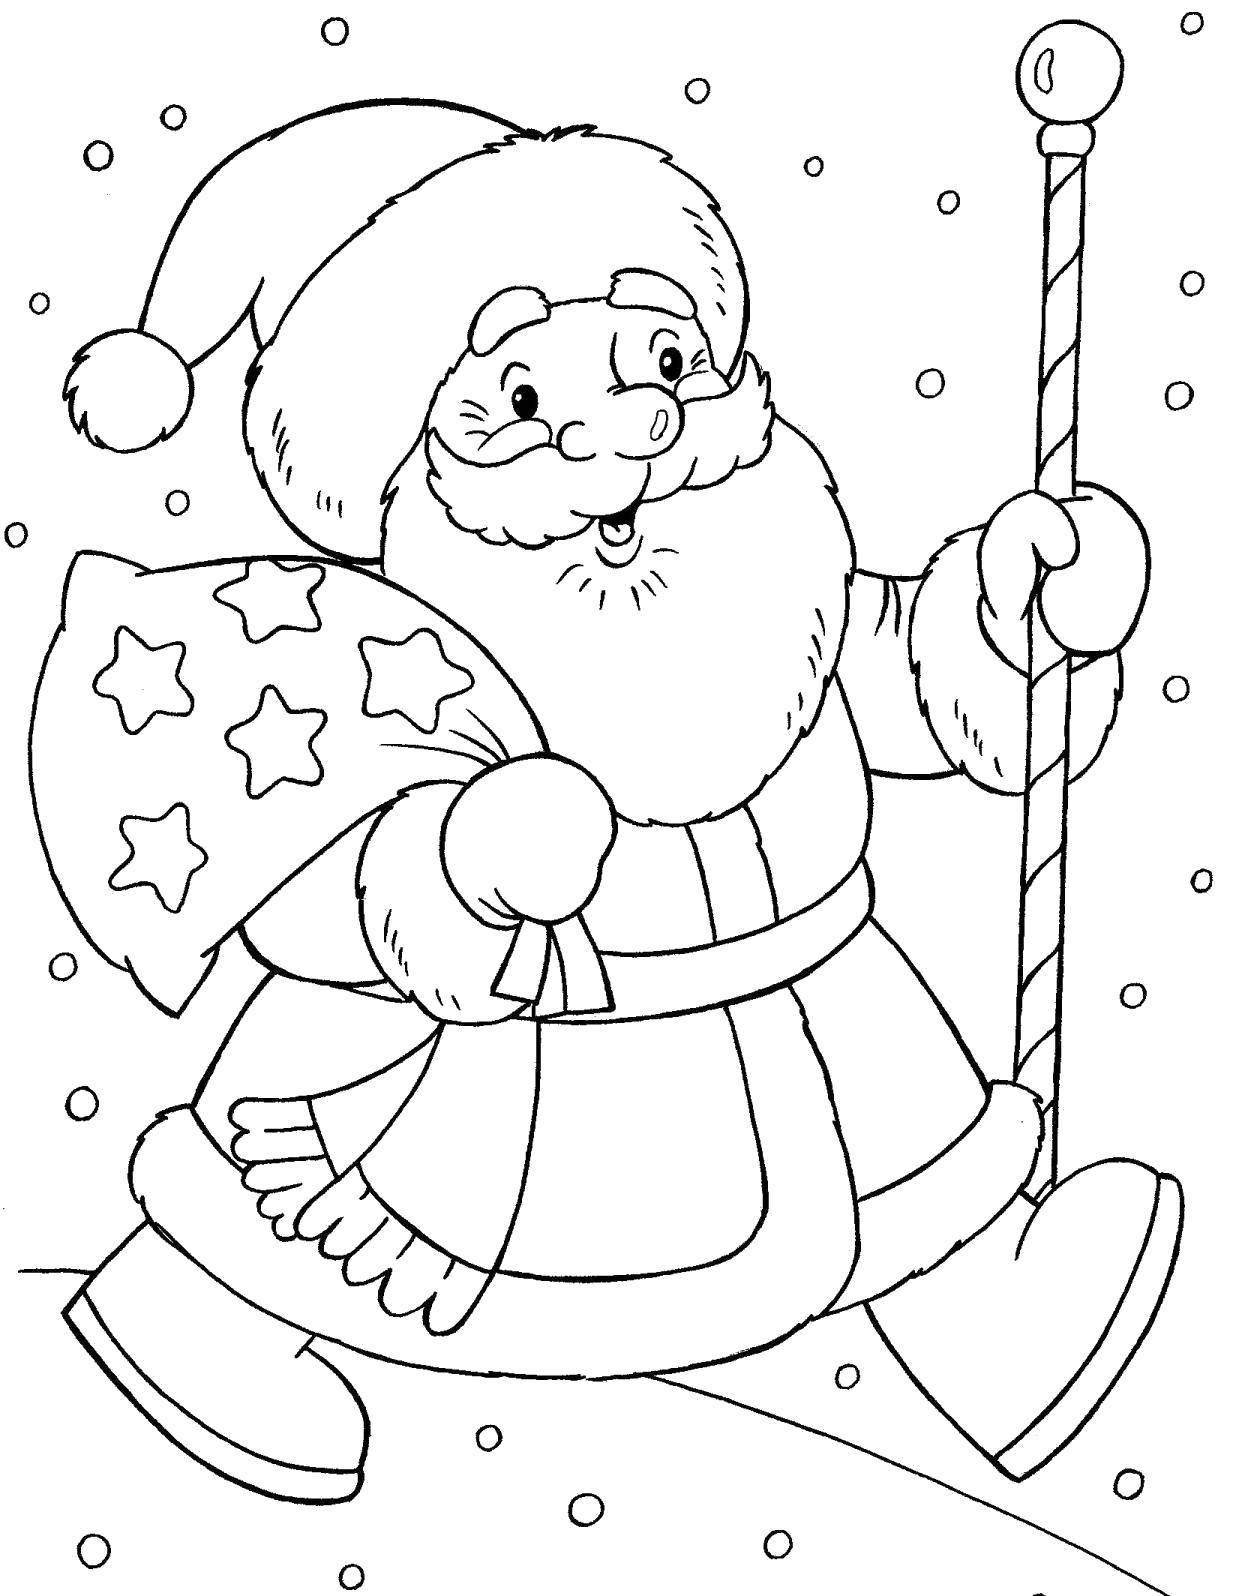 Coloring Santa Claus came to give presents. Category Santa Claus. Tags:  New Year, Santa Claus, gifts.